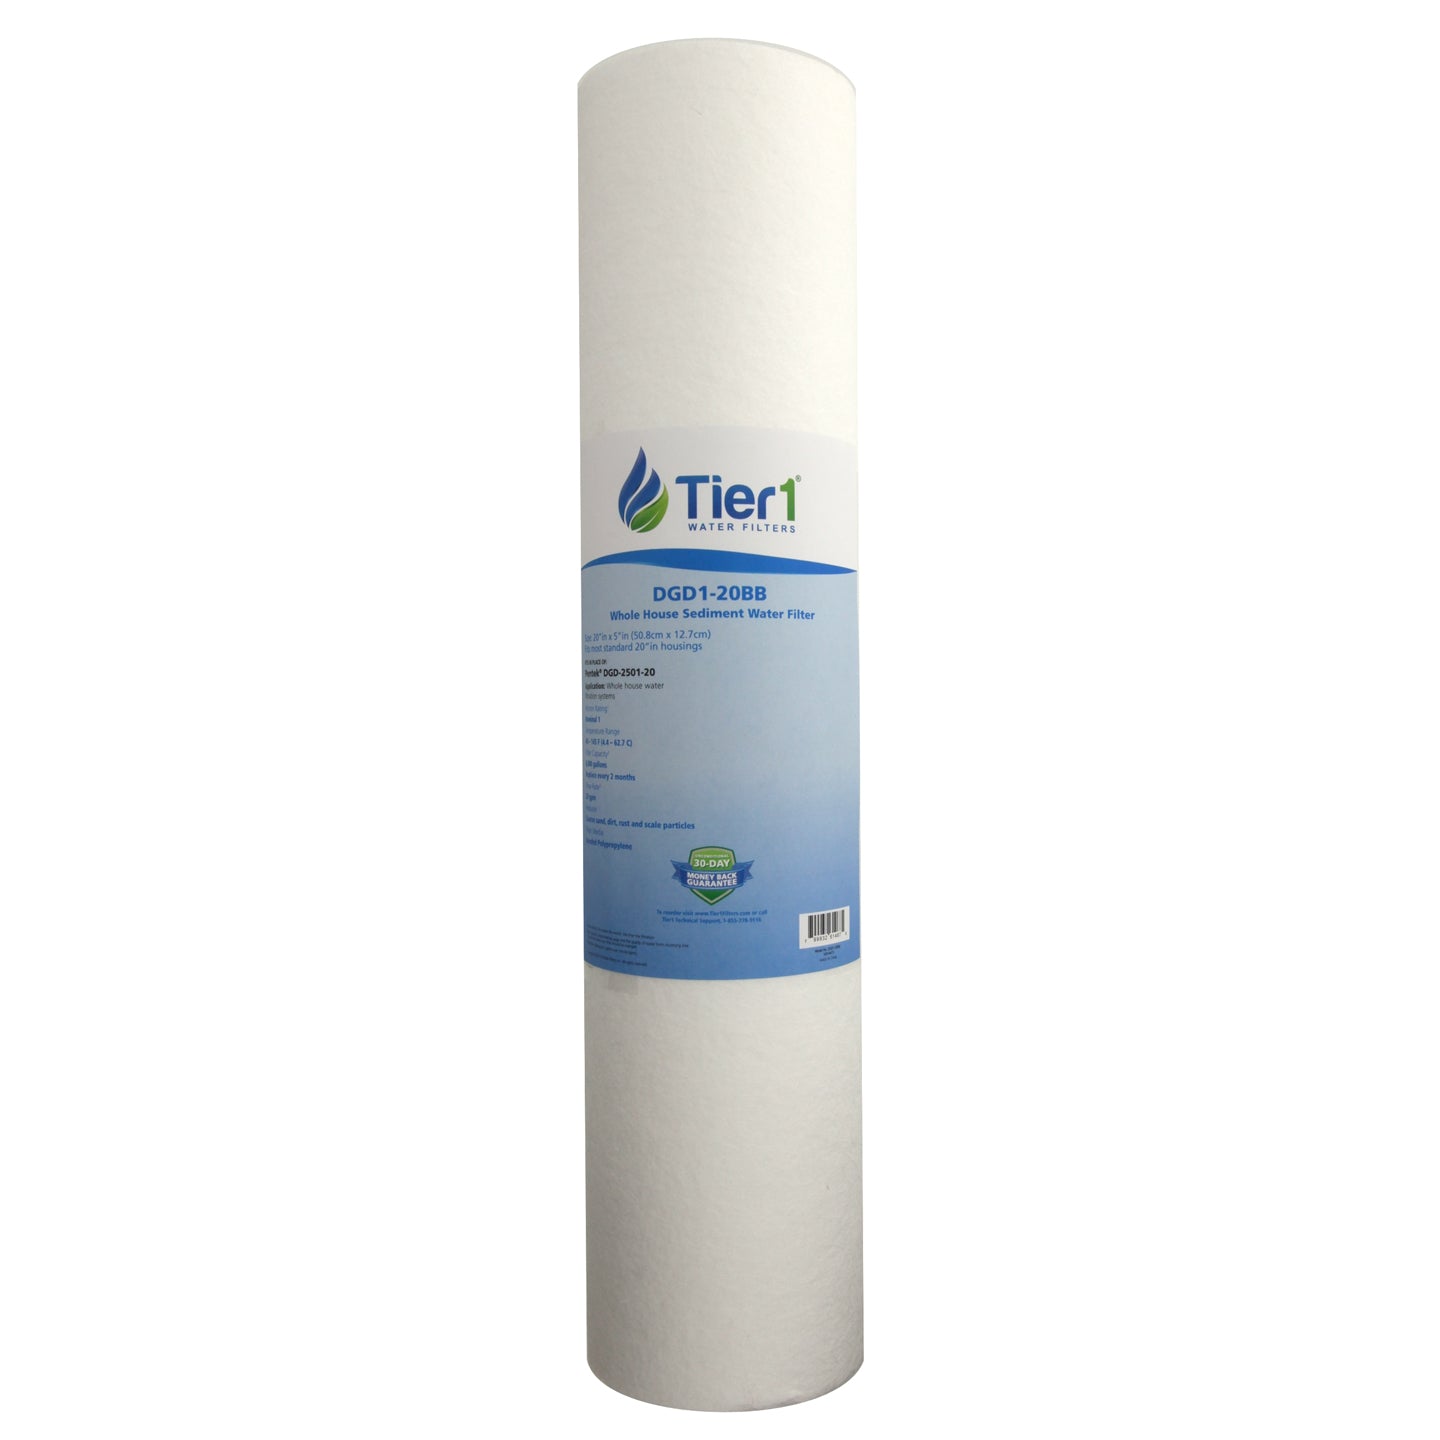 DGD-2501-20 Pentek Comparable Whole House Sediment Water Filter by Tier1